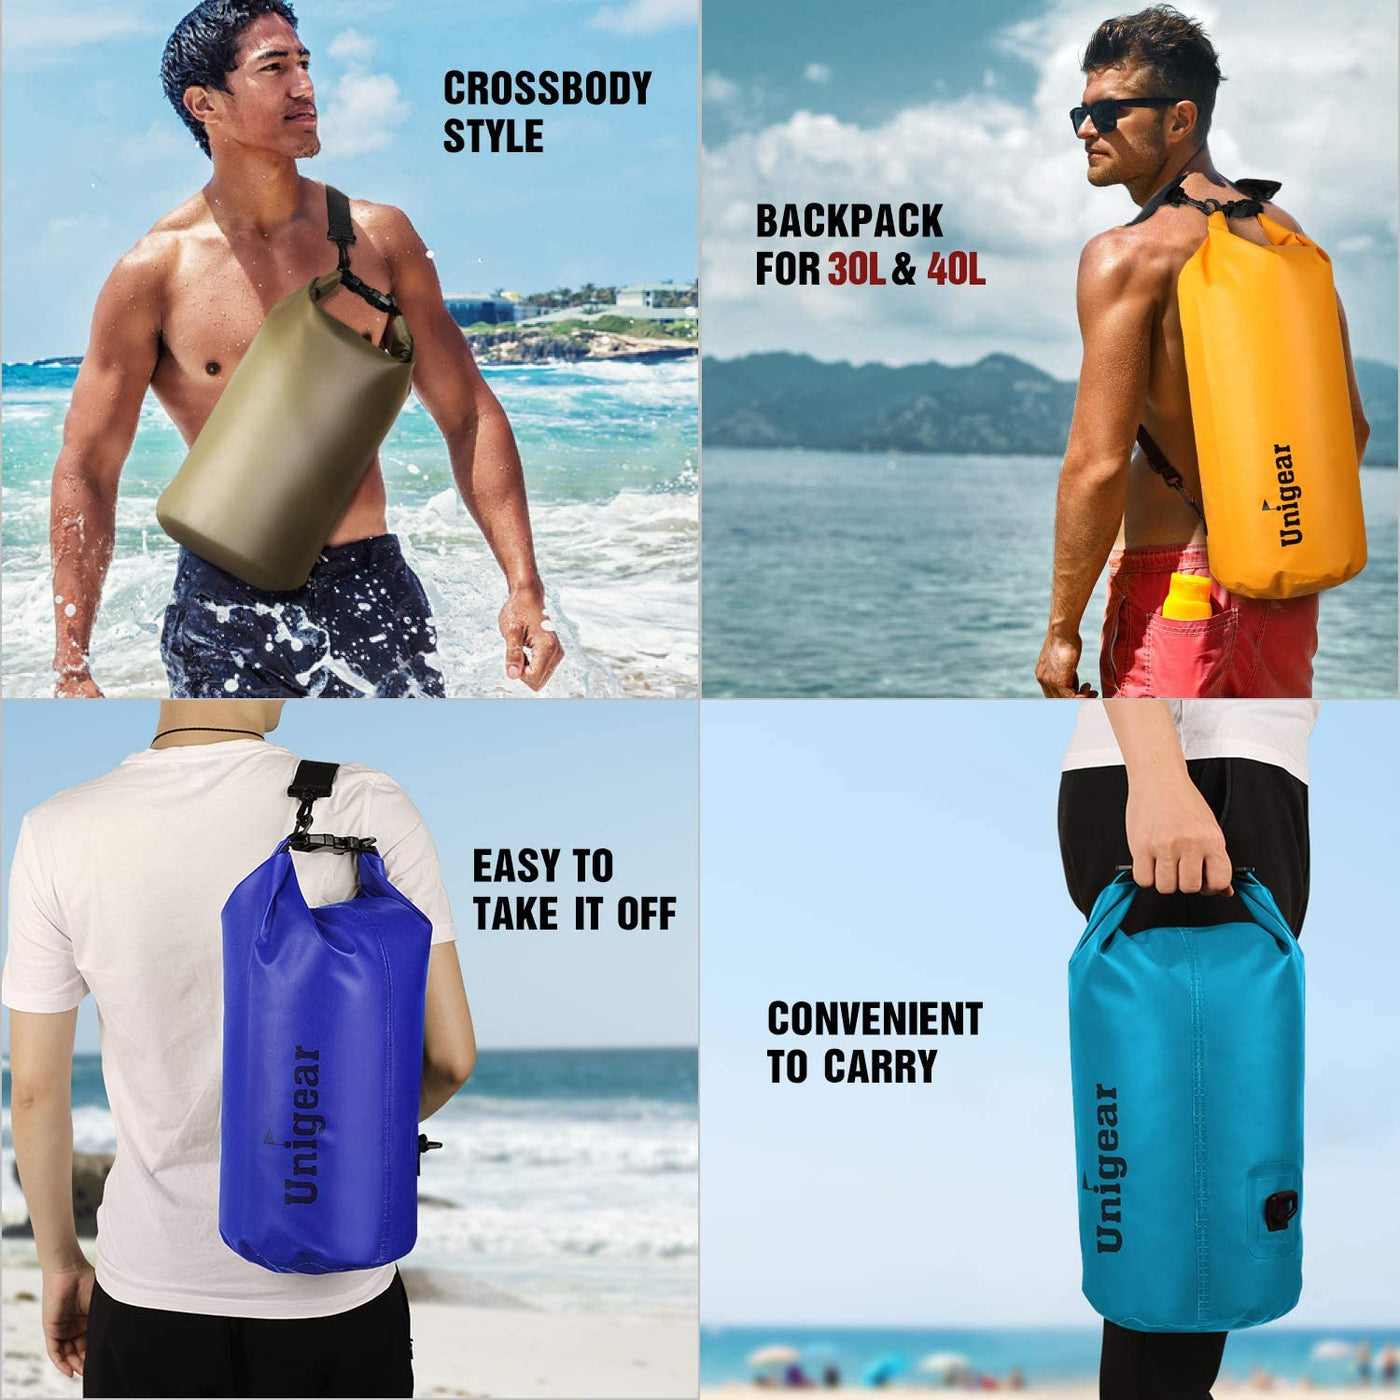 Dry Bag Waterproof, Floating and Lightweight Bags for Kayaking, Boating, Fishing, Swimming and Camping with Waterproof Phone Case